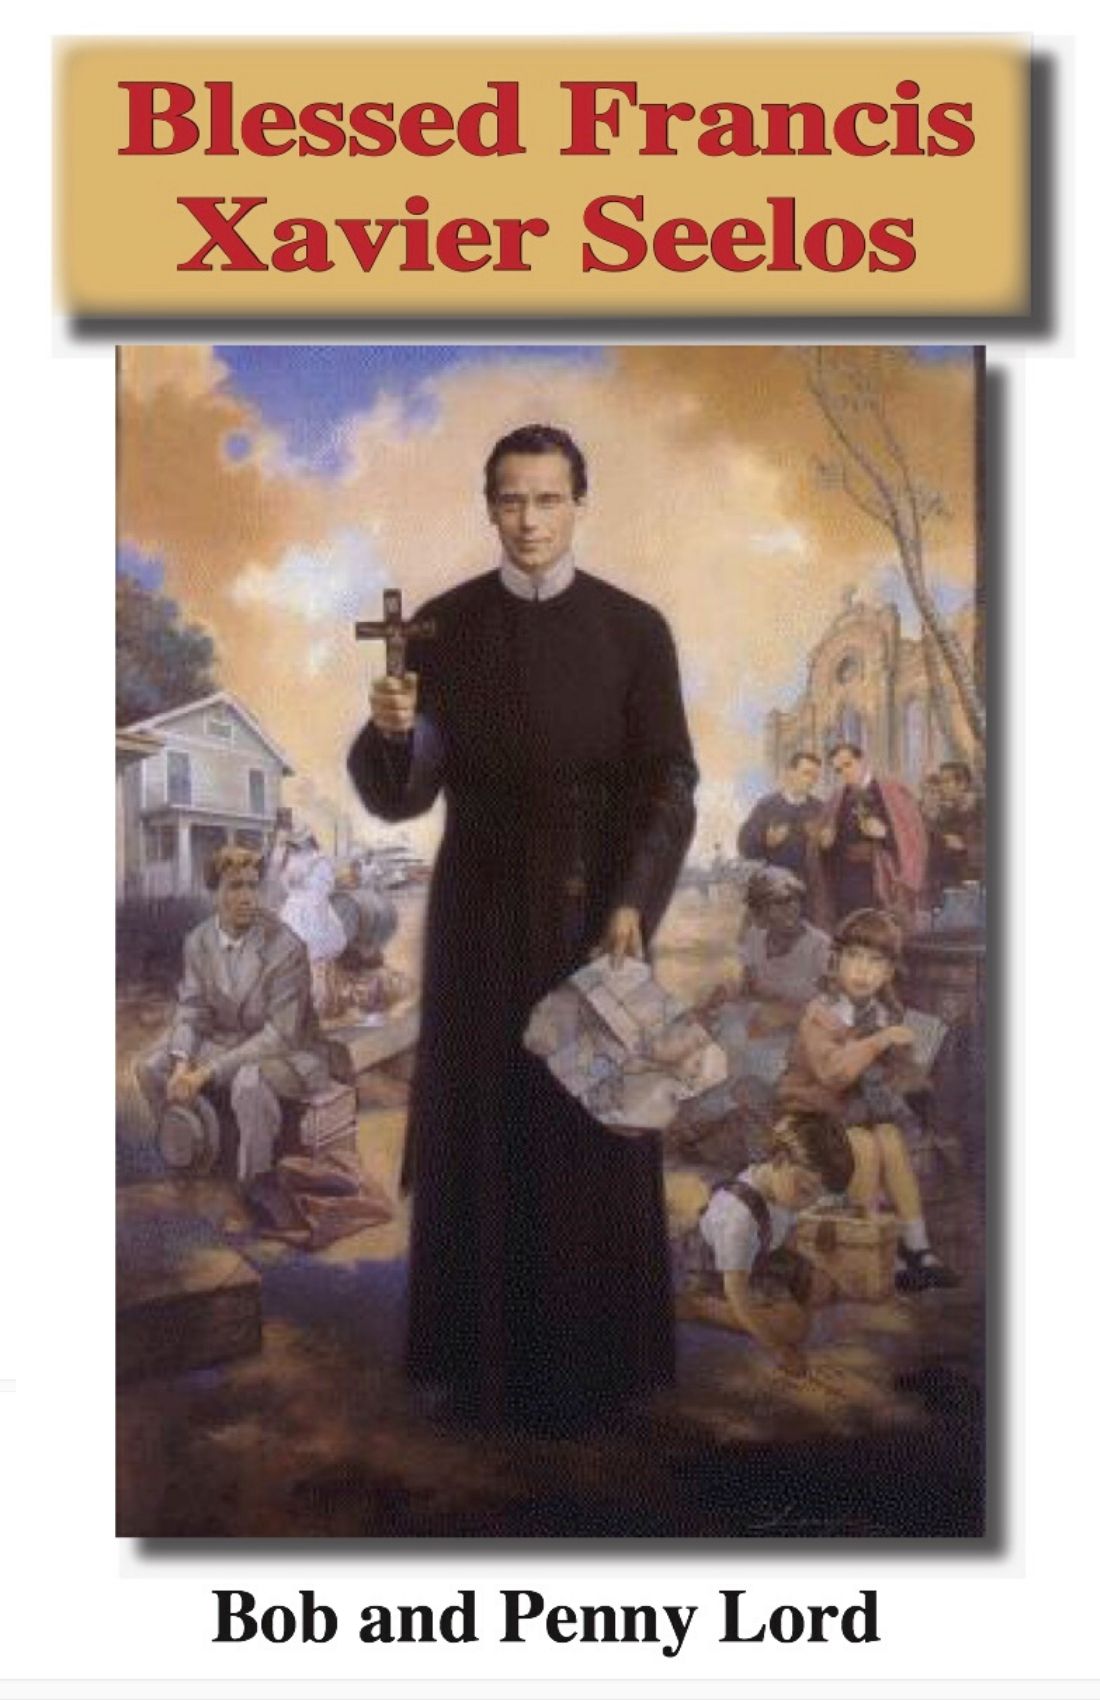 Blessed Francis Xavier Seelos DVD - Bob and Penny Lord